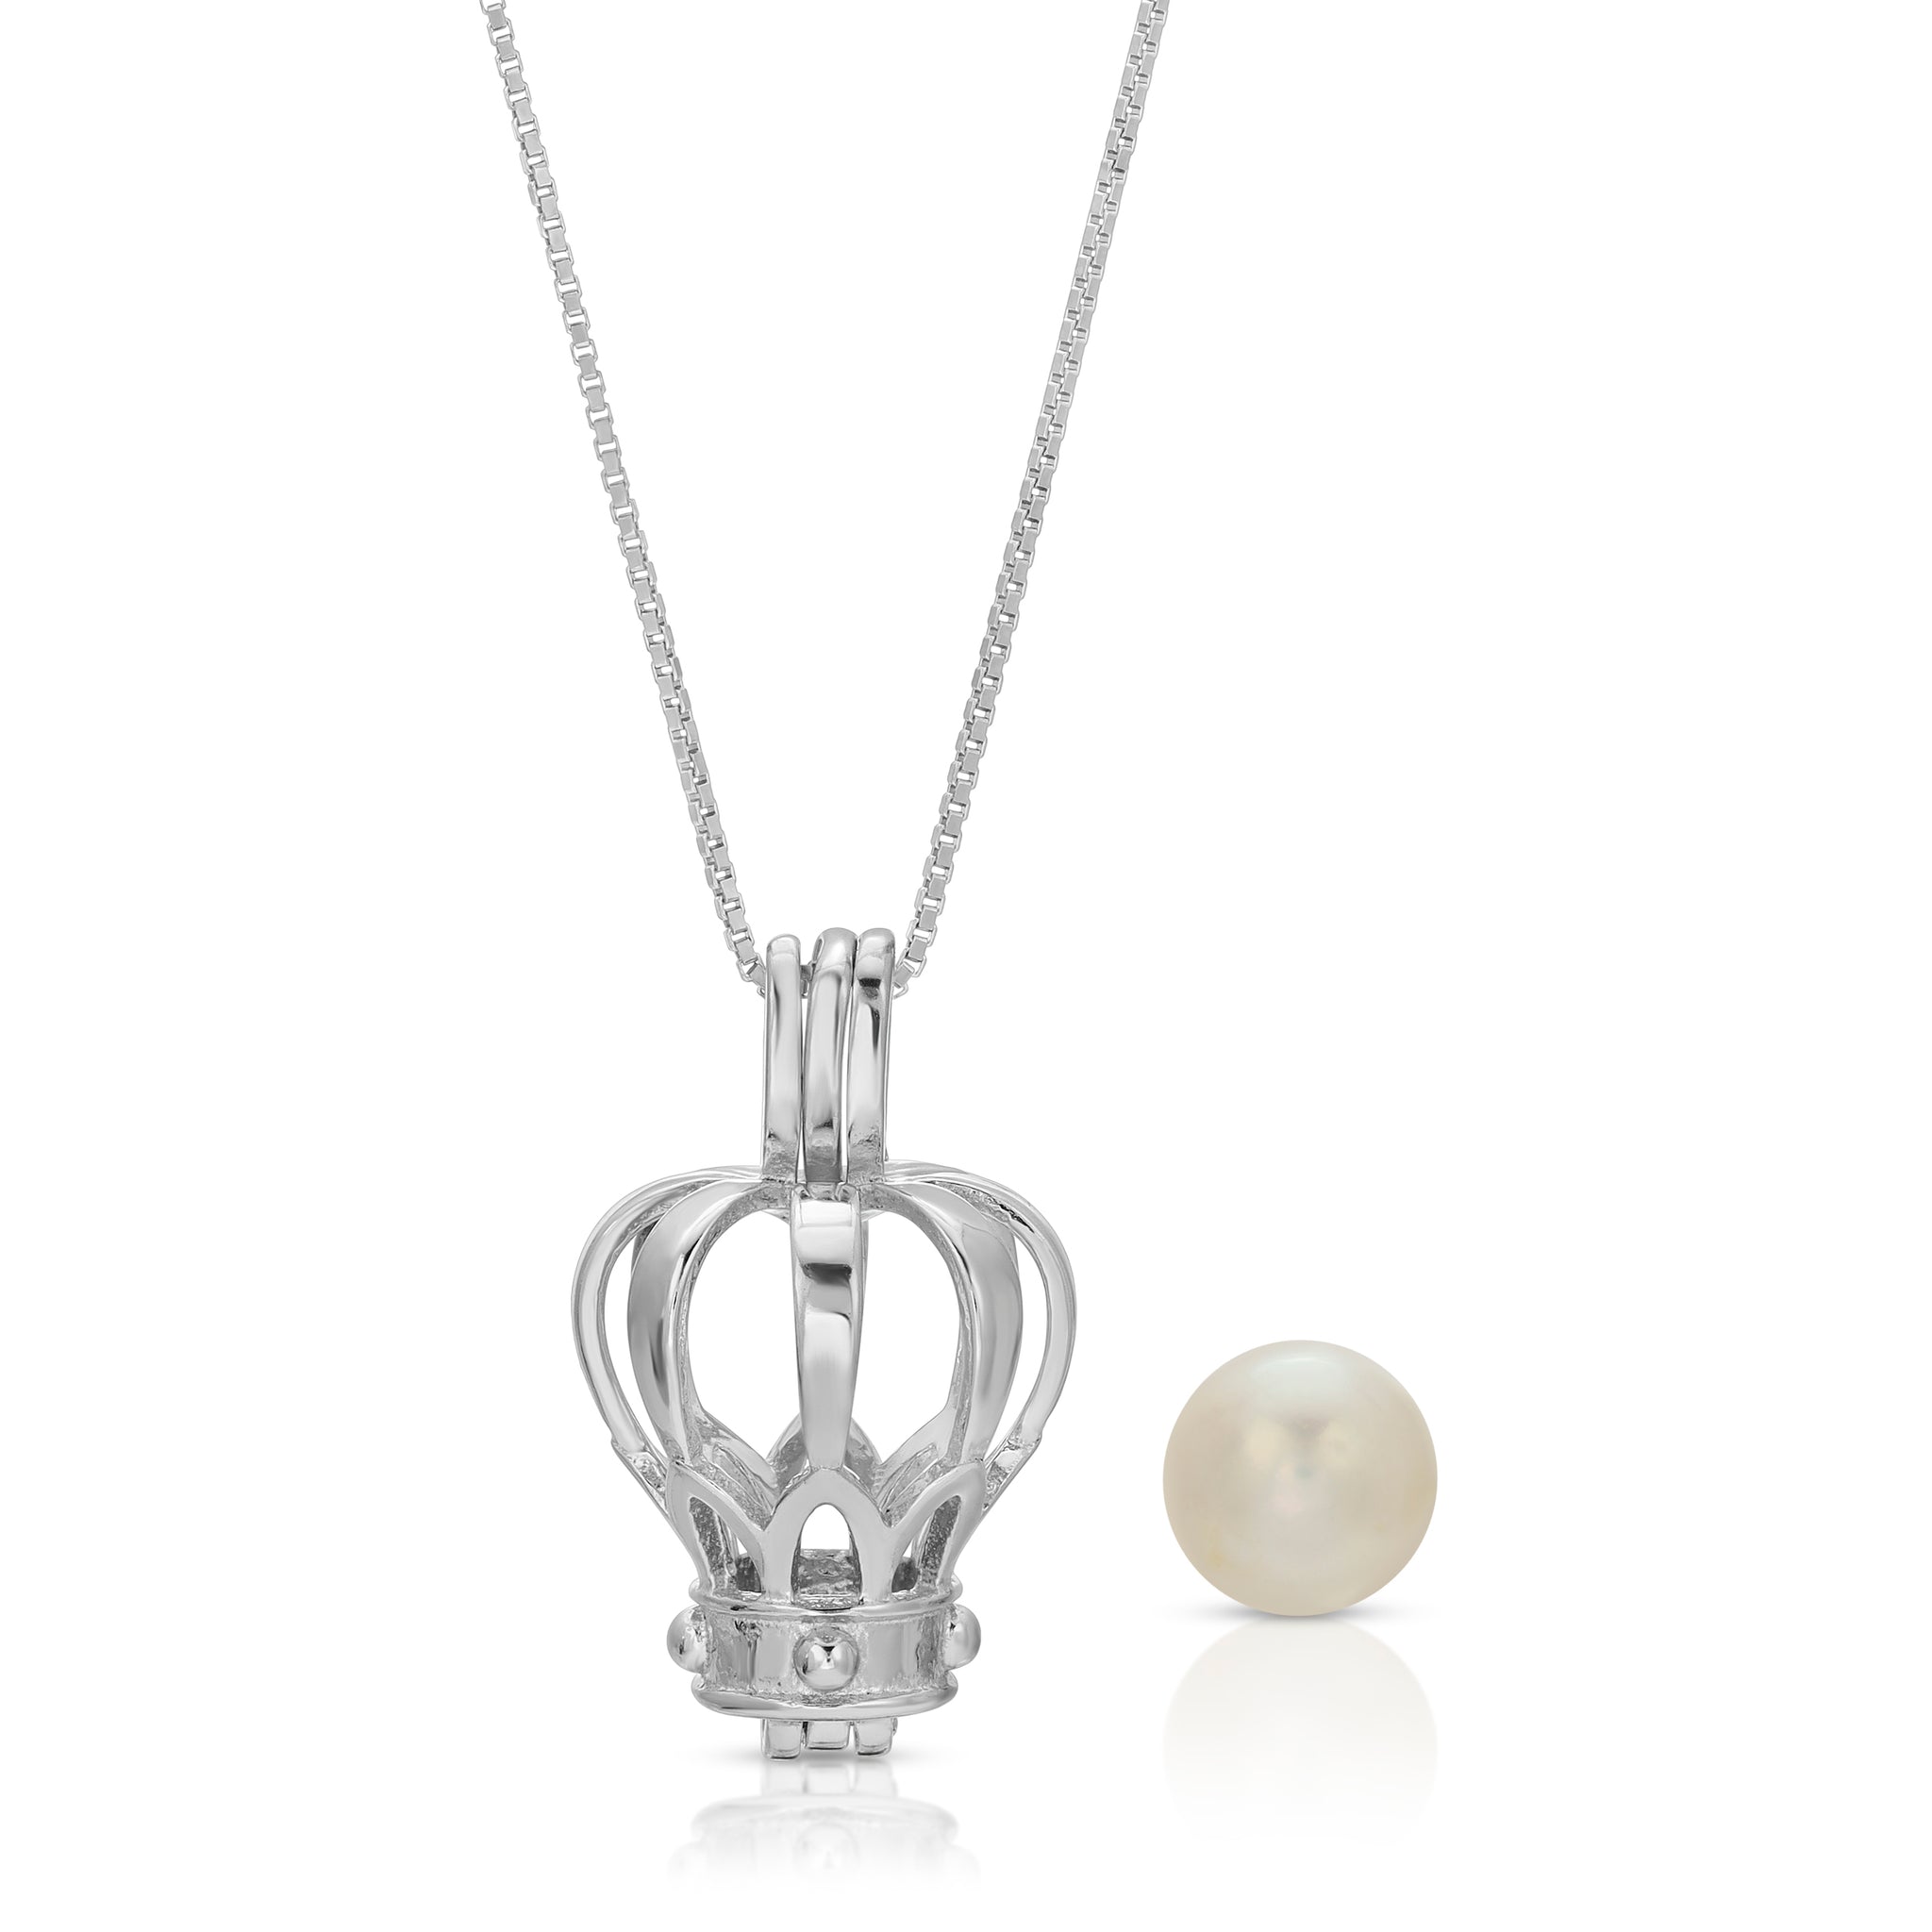 Pearl Cage Pendant | Pearl Pendant Necklace | Sterling Silver Pearl Pendant (12mm), Gold